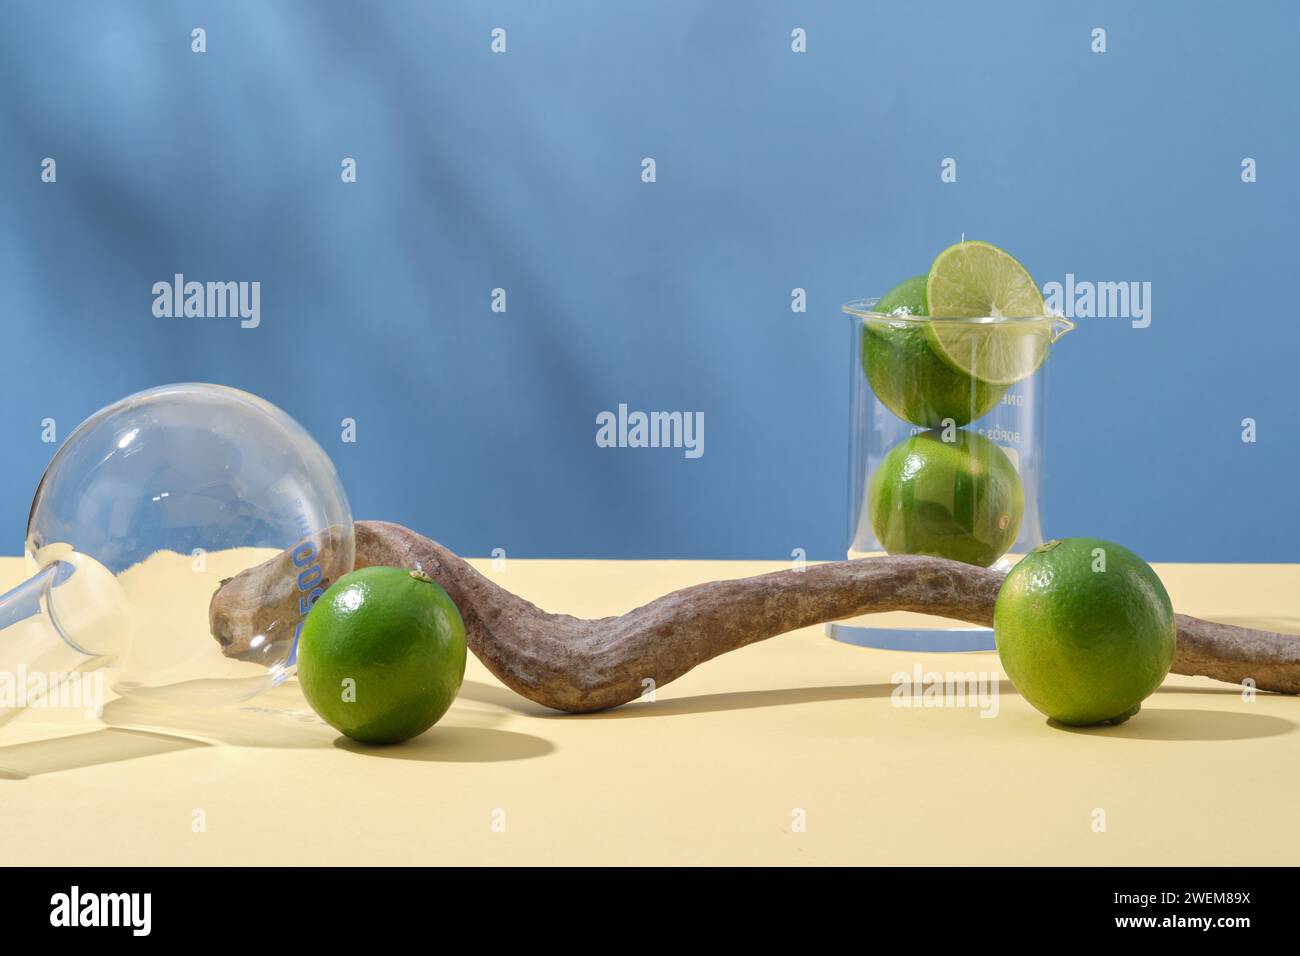 Minimal concept for display product with fresh limes, lab glassware and dried twig on blue background. Lime extract contains a lot of vitamin C and nu Stock Photo